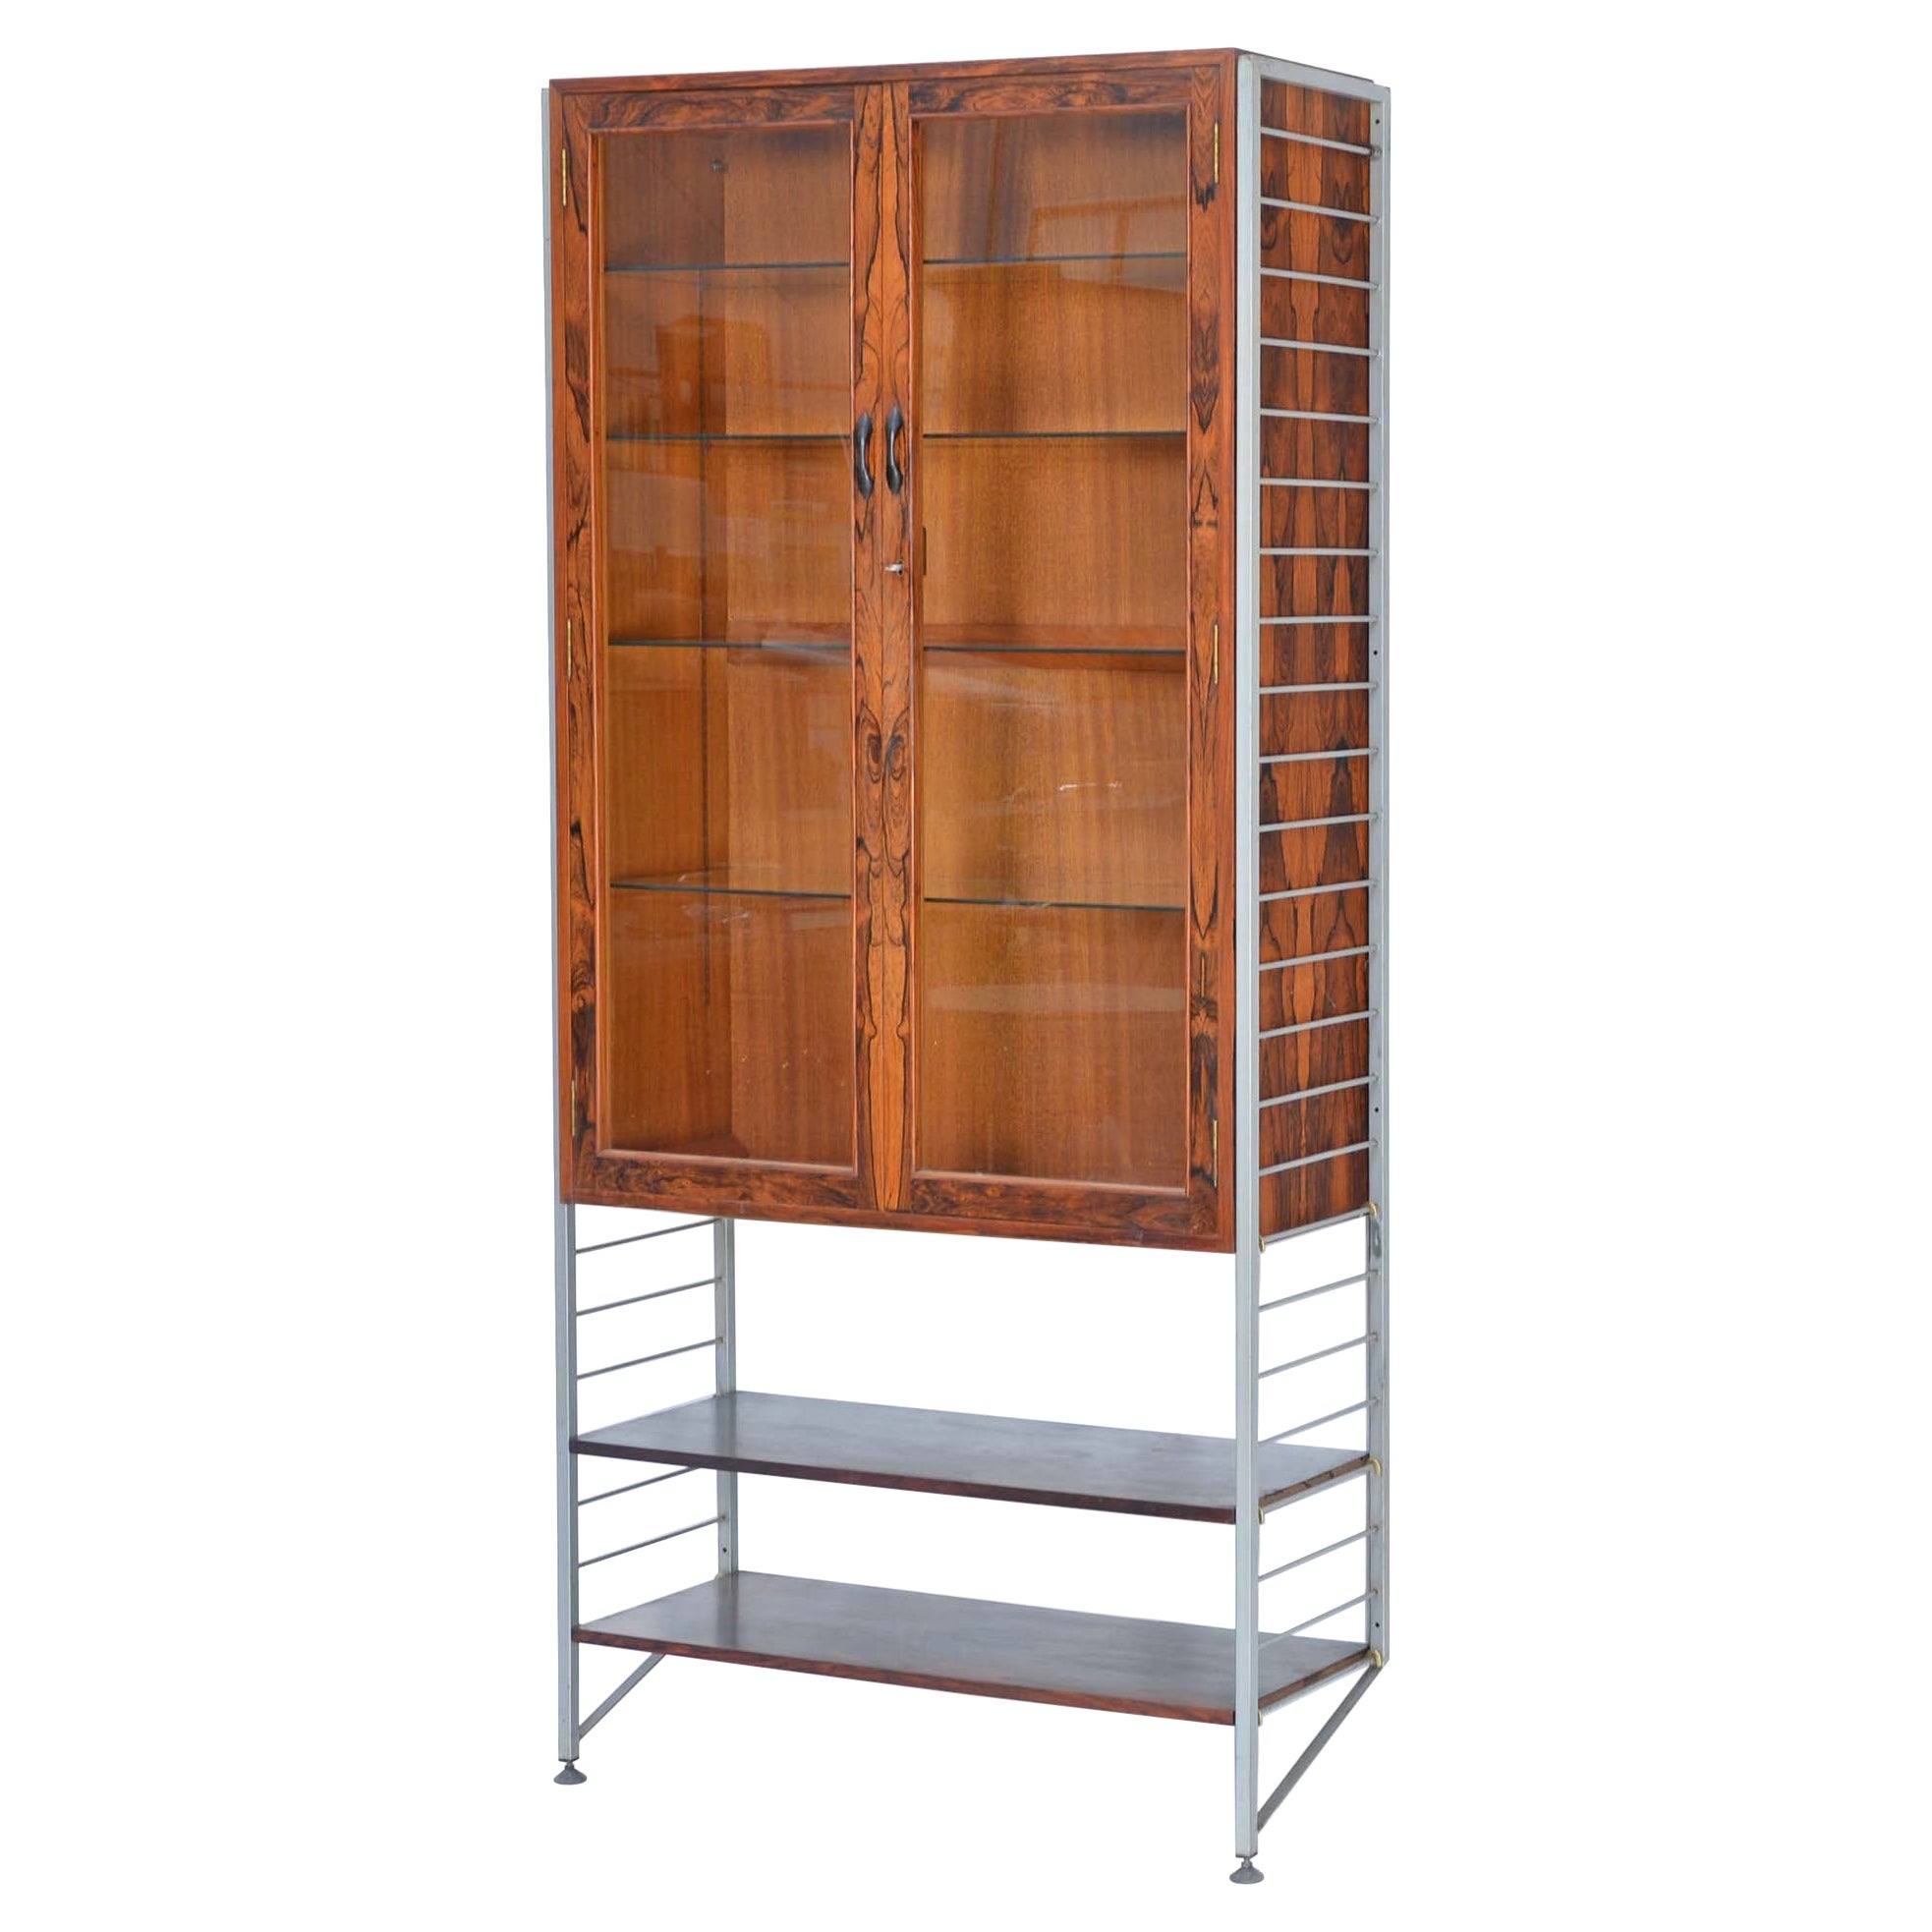 Heals Rosewood Ladderax cabinet, or drinks cabinet, for Staples of Cricklewood For Sale